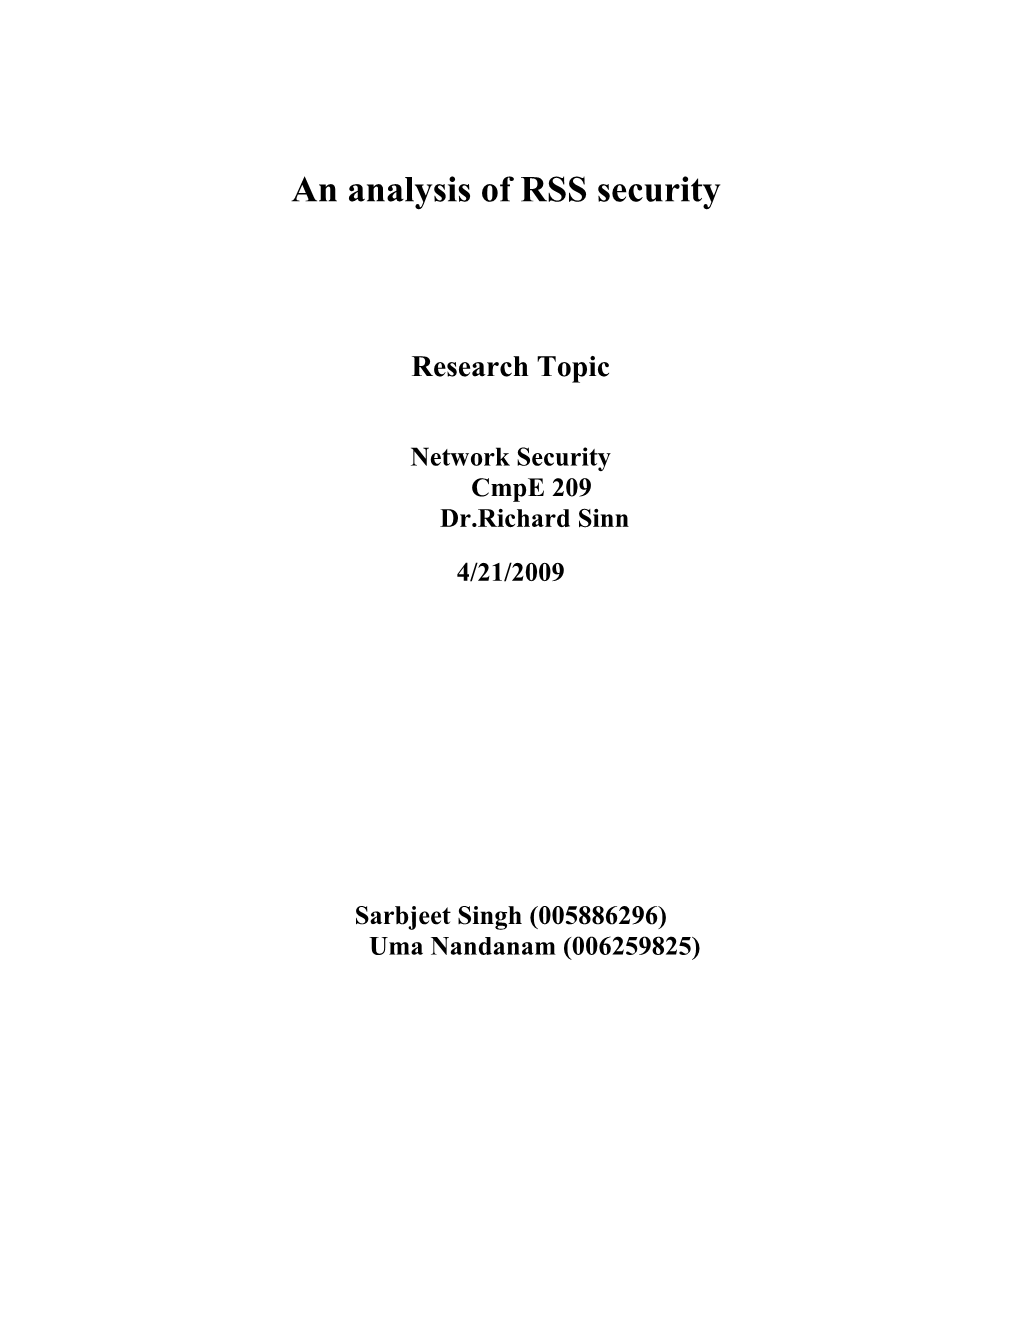 An Analysis of RSS Security